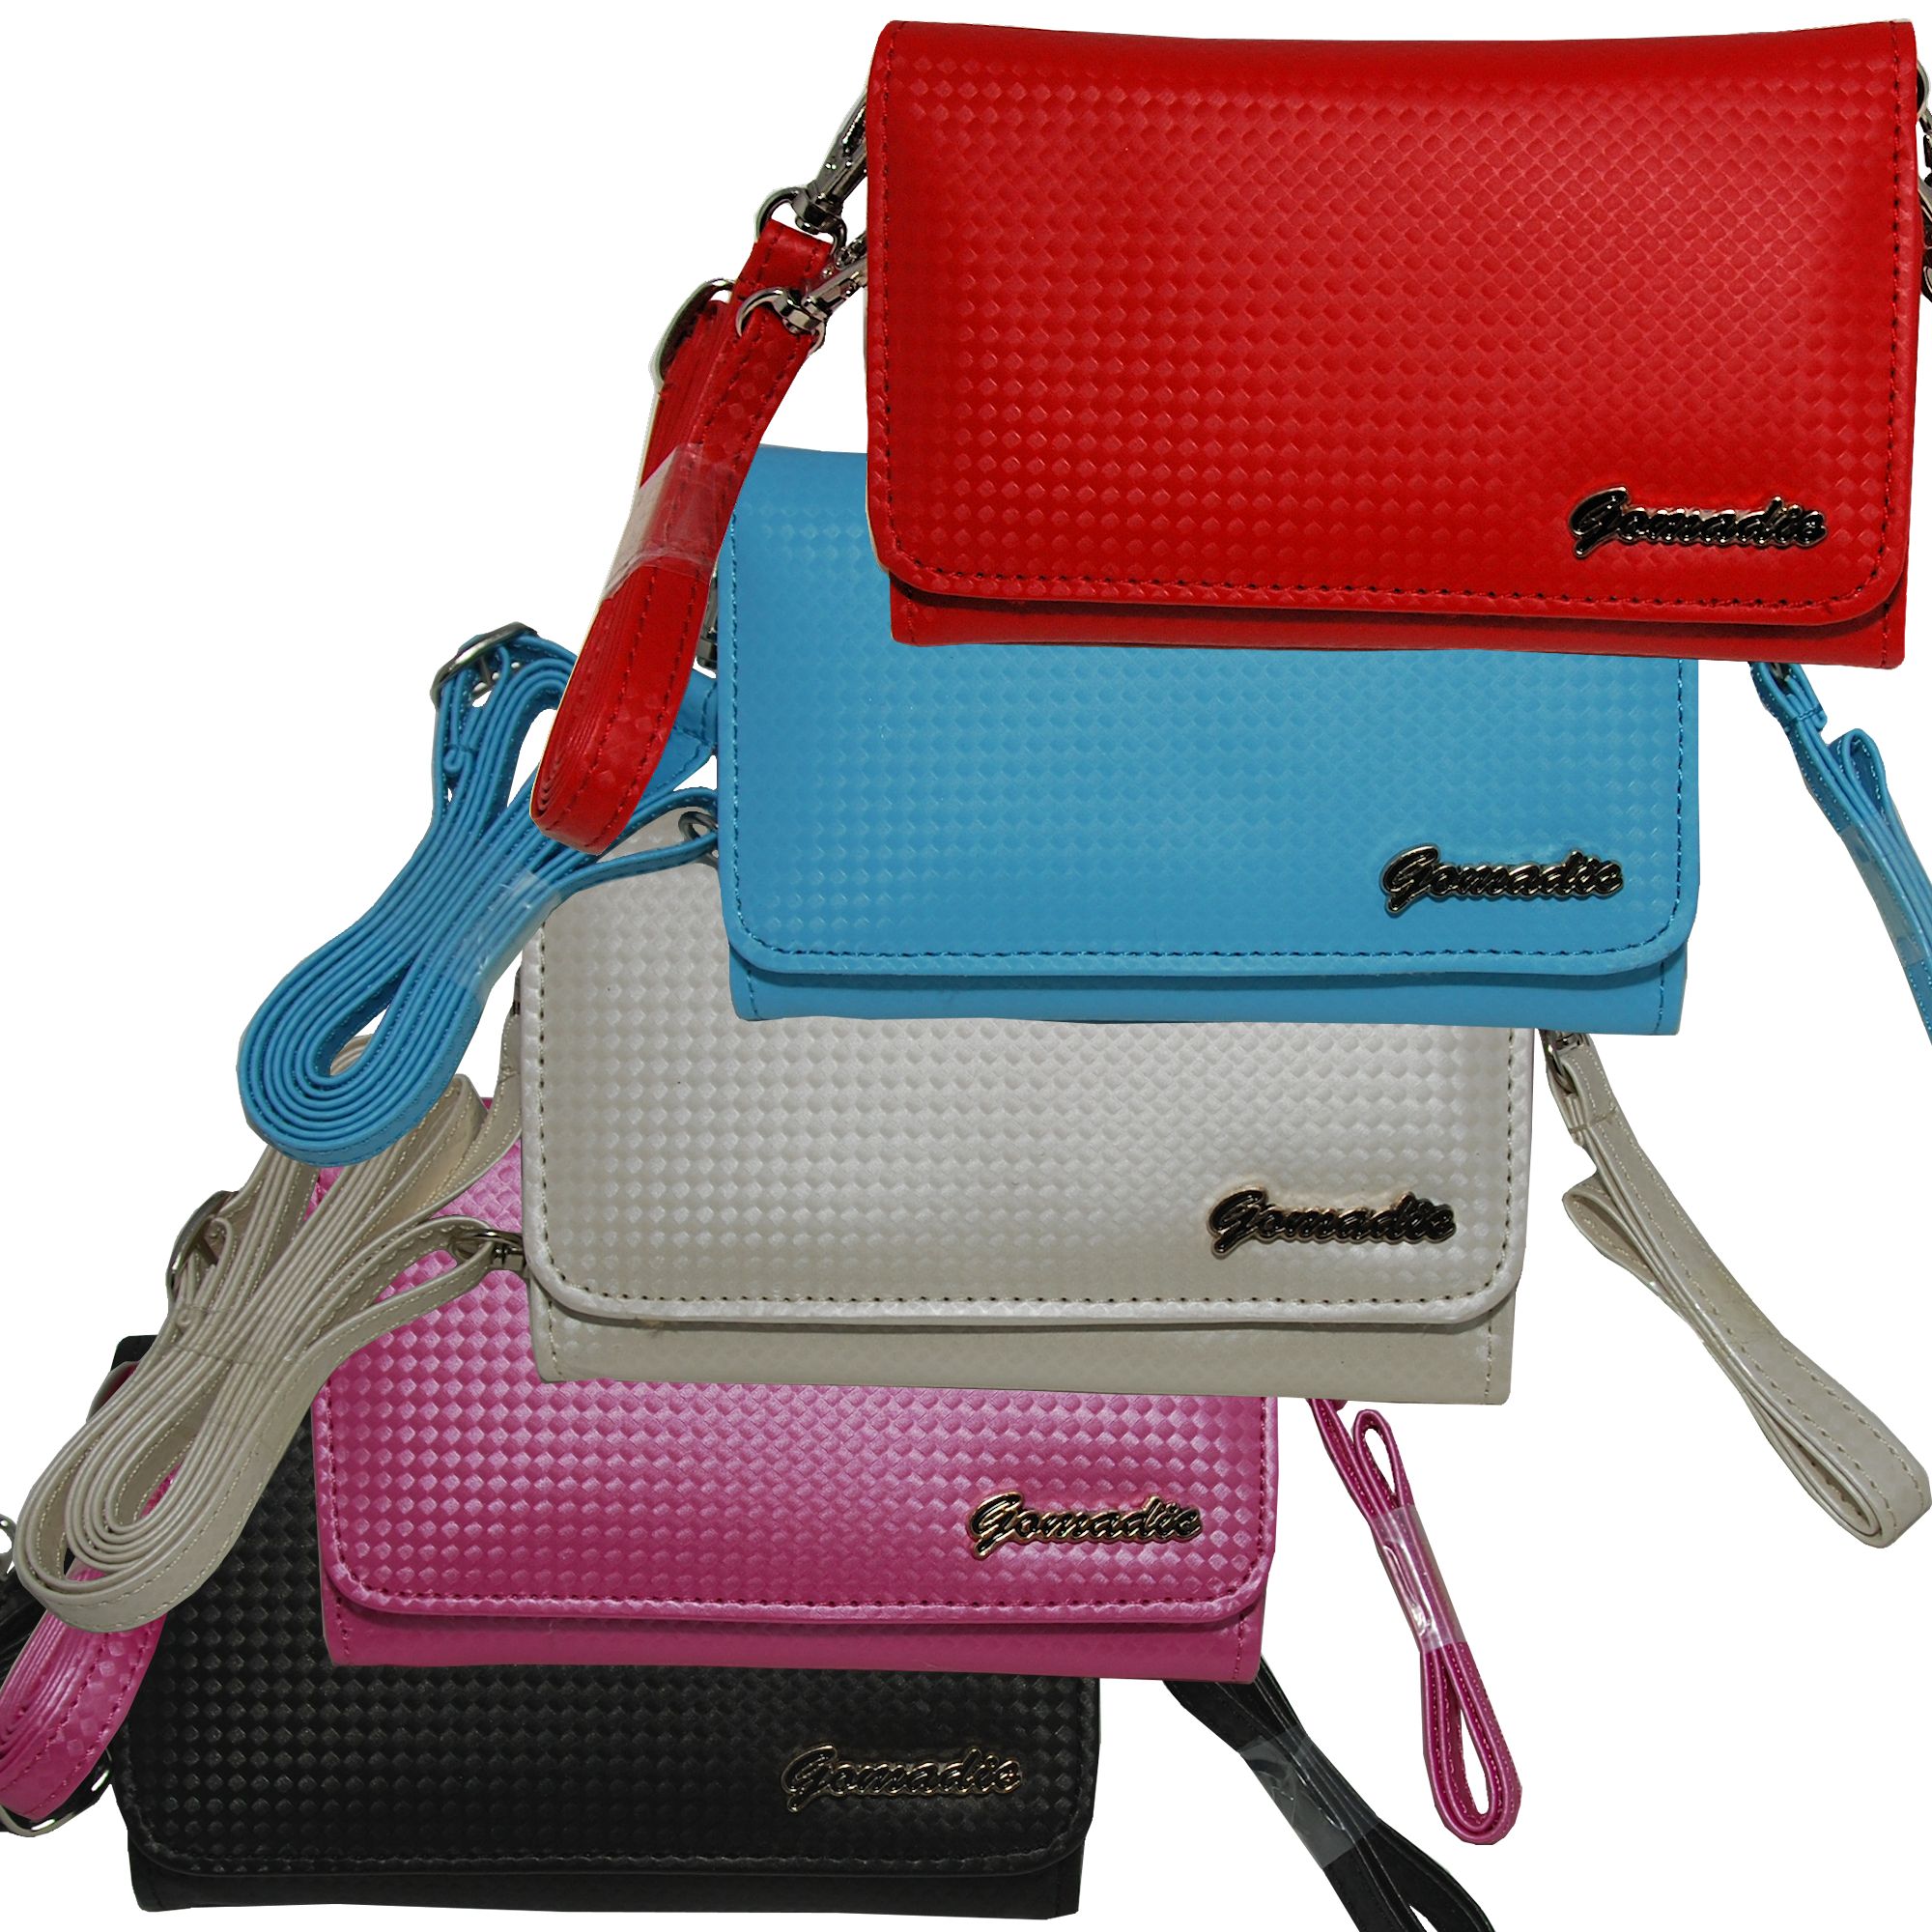 Purse Handbag Case for the Nokia 6790  - Color Options Blue Pink White Black and Red